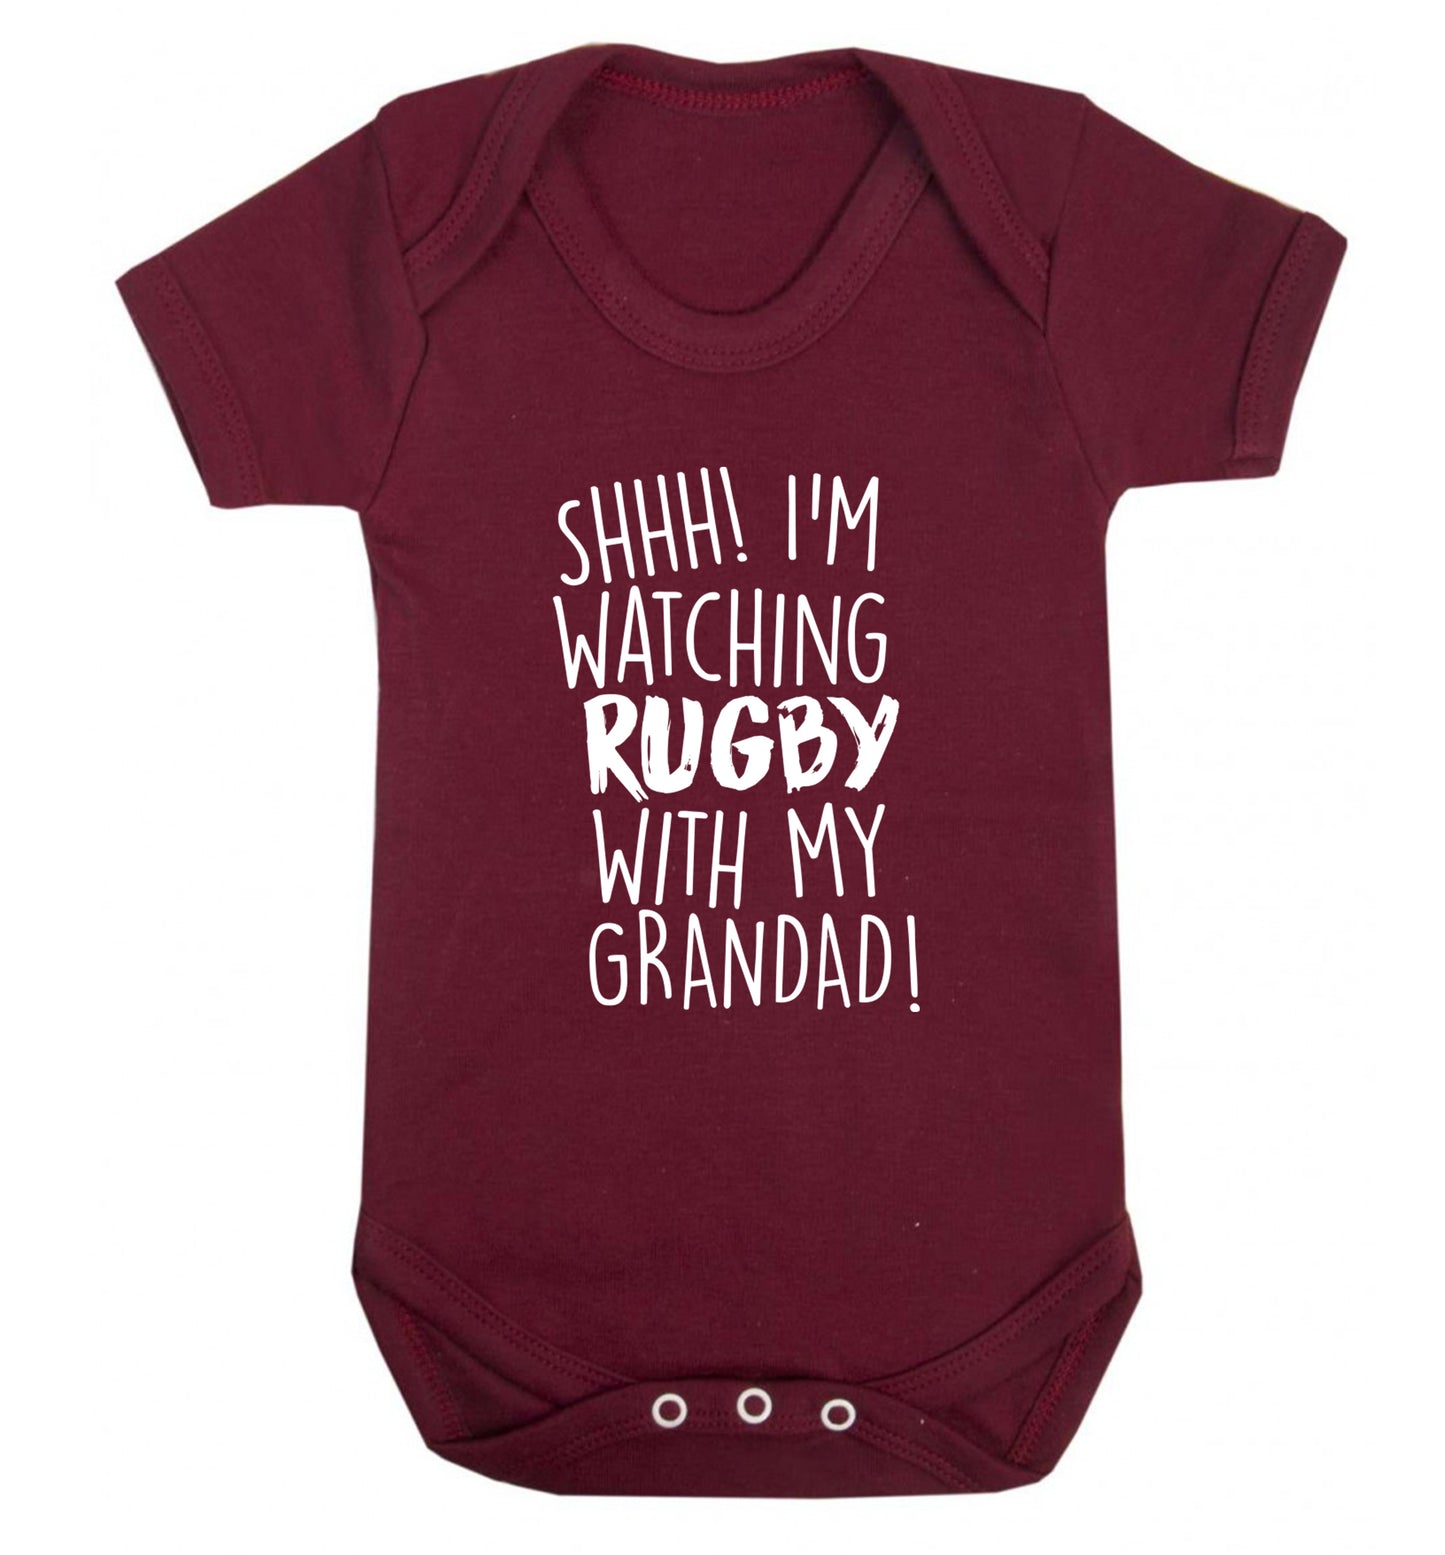 Shh I'm watching rugby with my grandaughter Baby Vest maroon 18-24 months